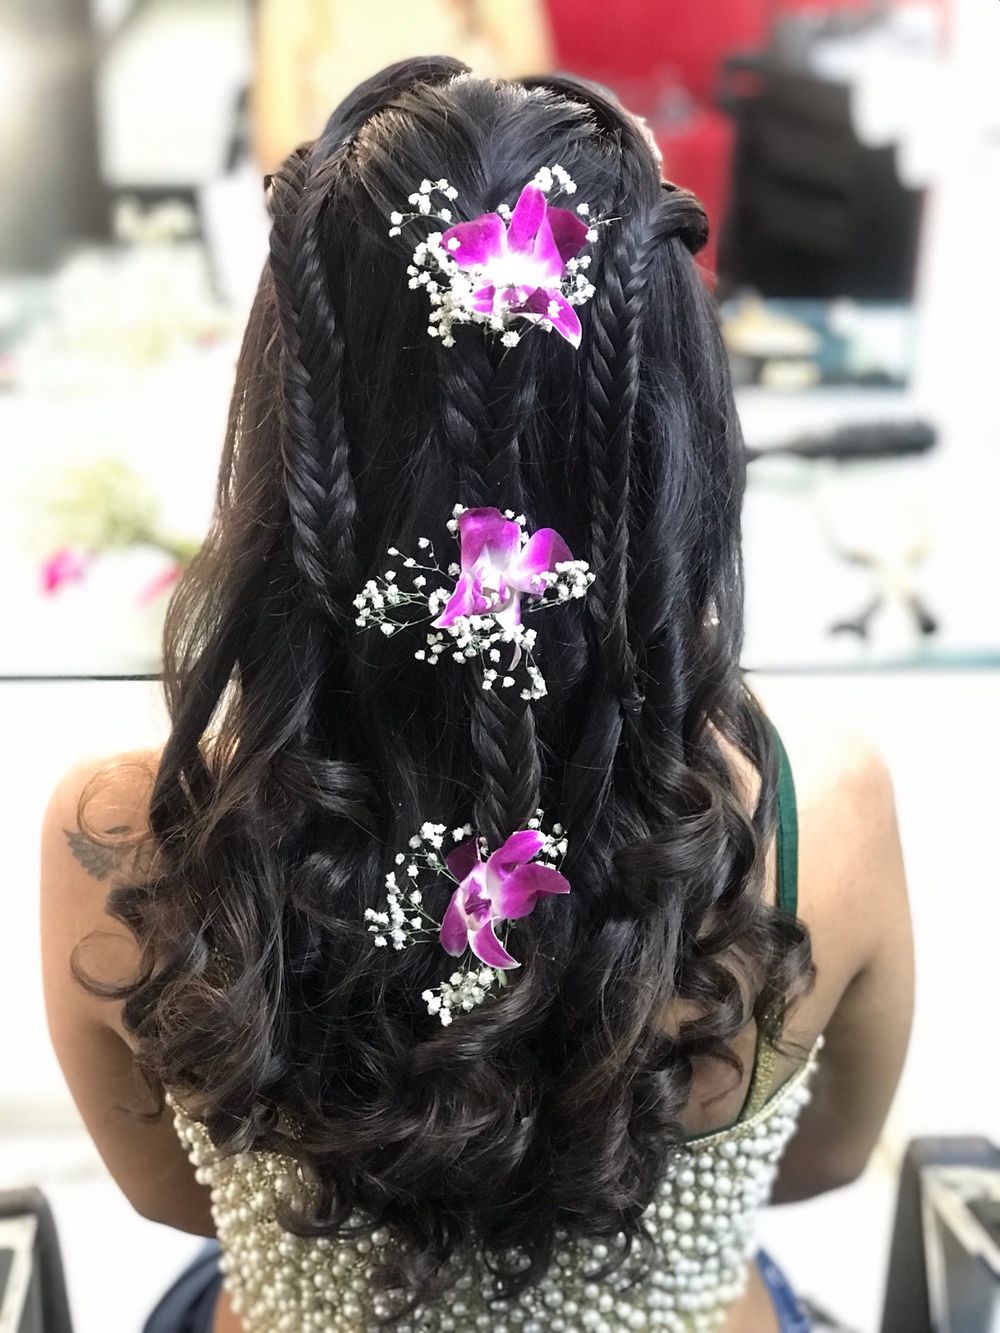 Photo of Braided hairdo with orchids in hair